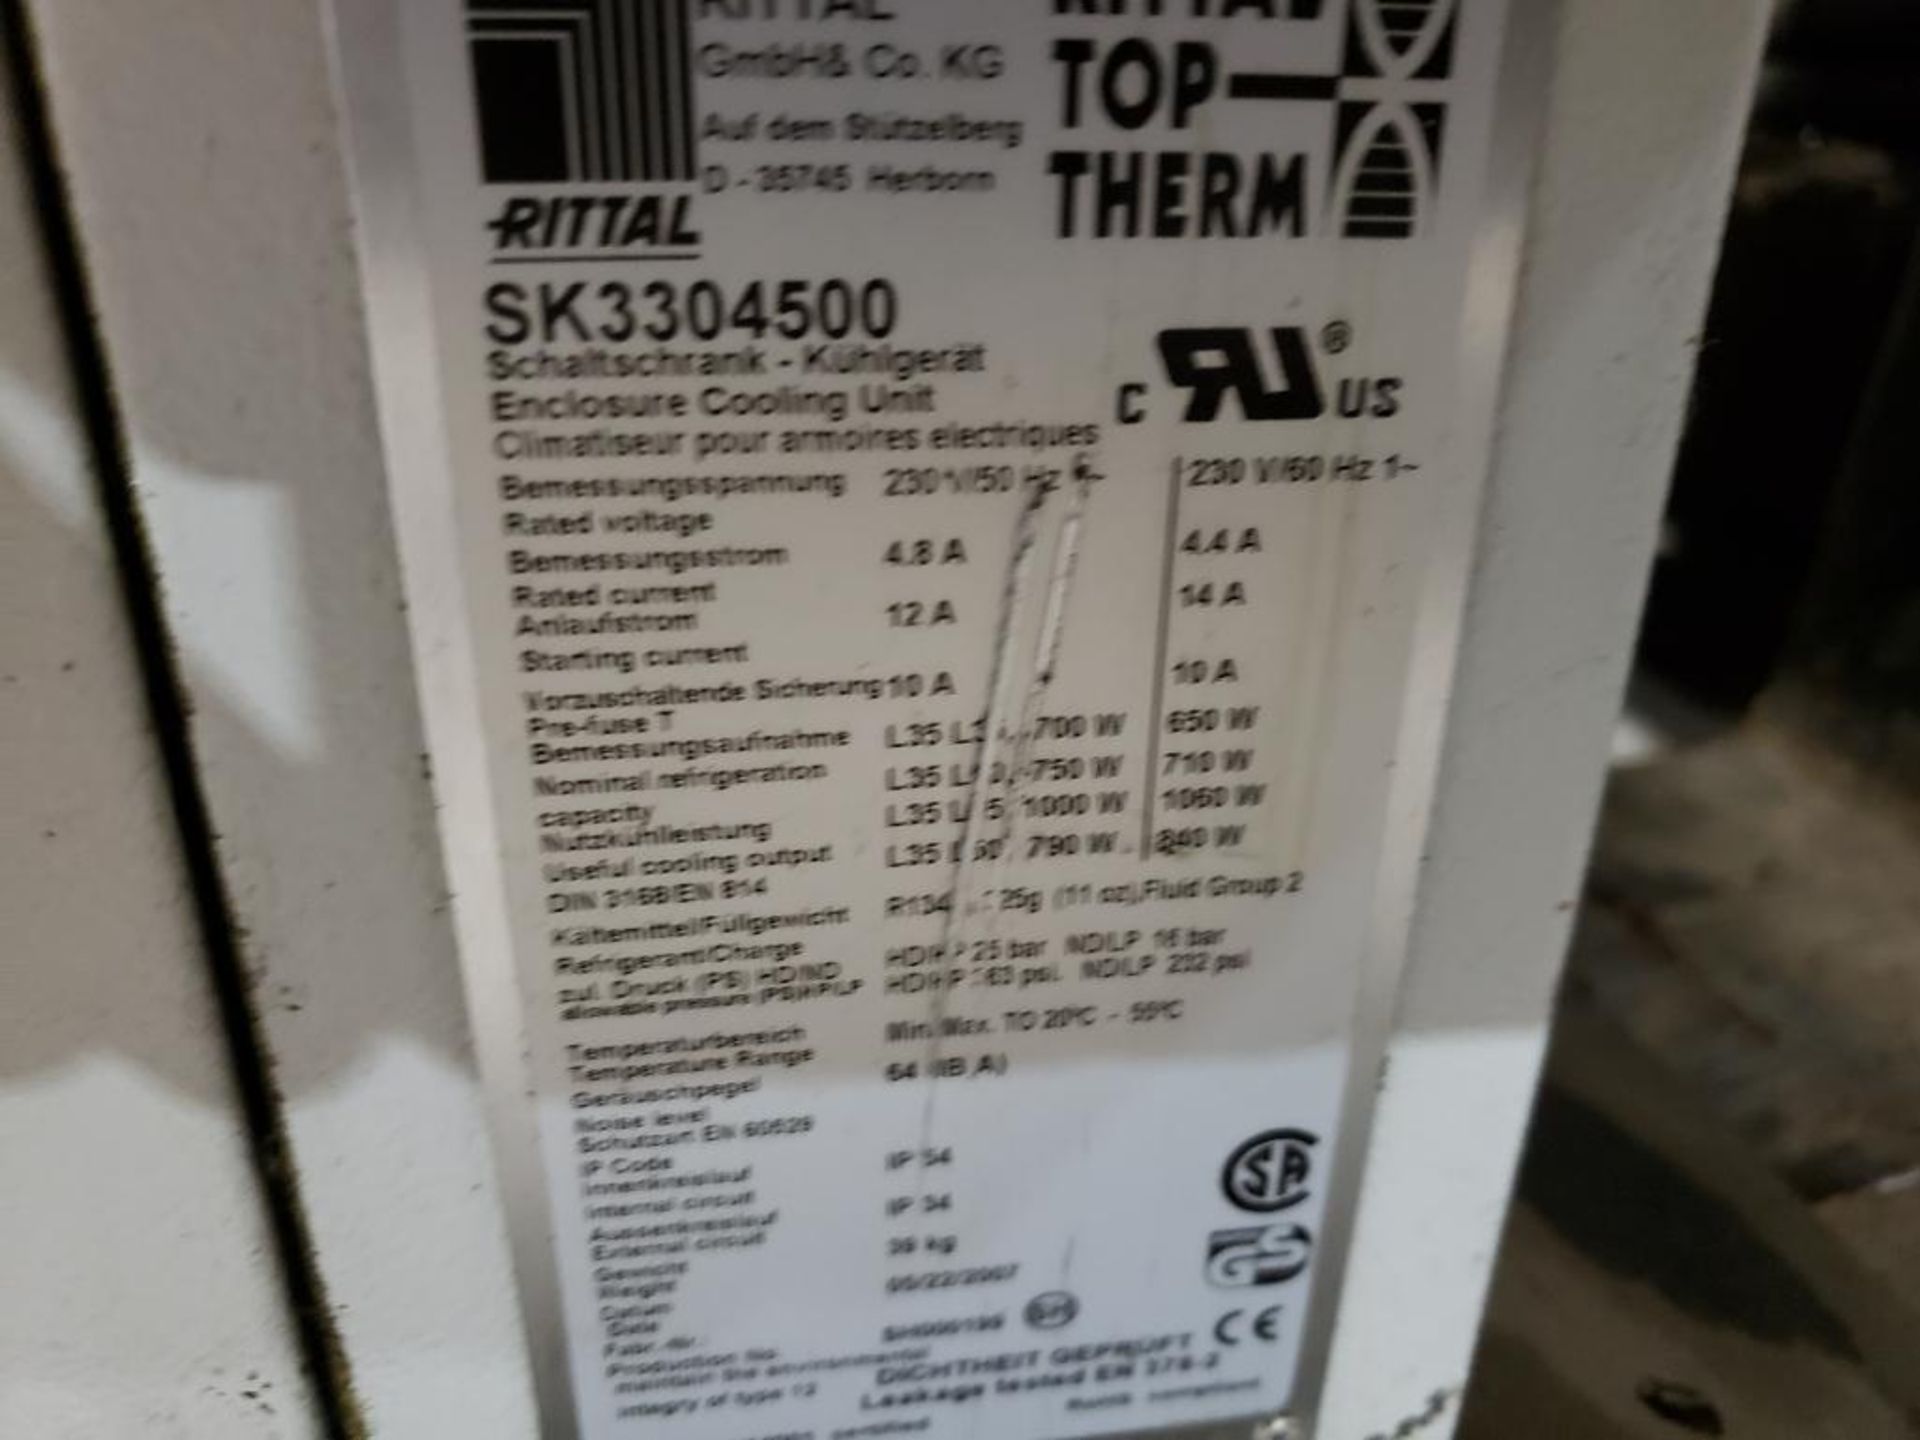 Rittal electronic enclosure air conditioner. Model number SK-3304500. - Image 2 of 2